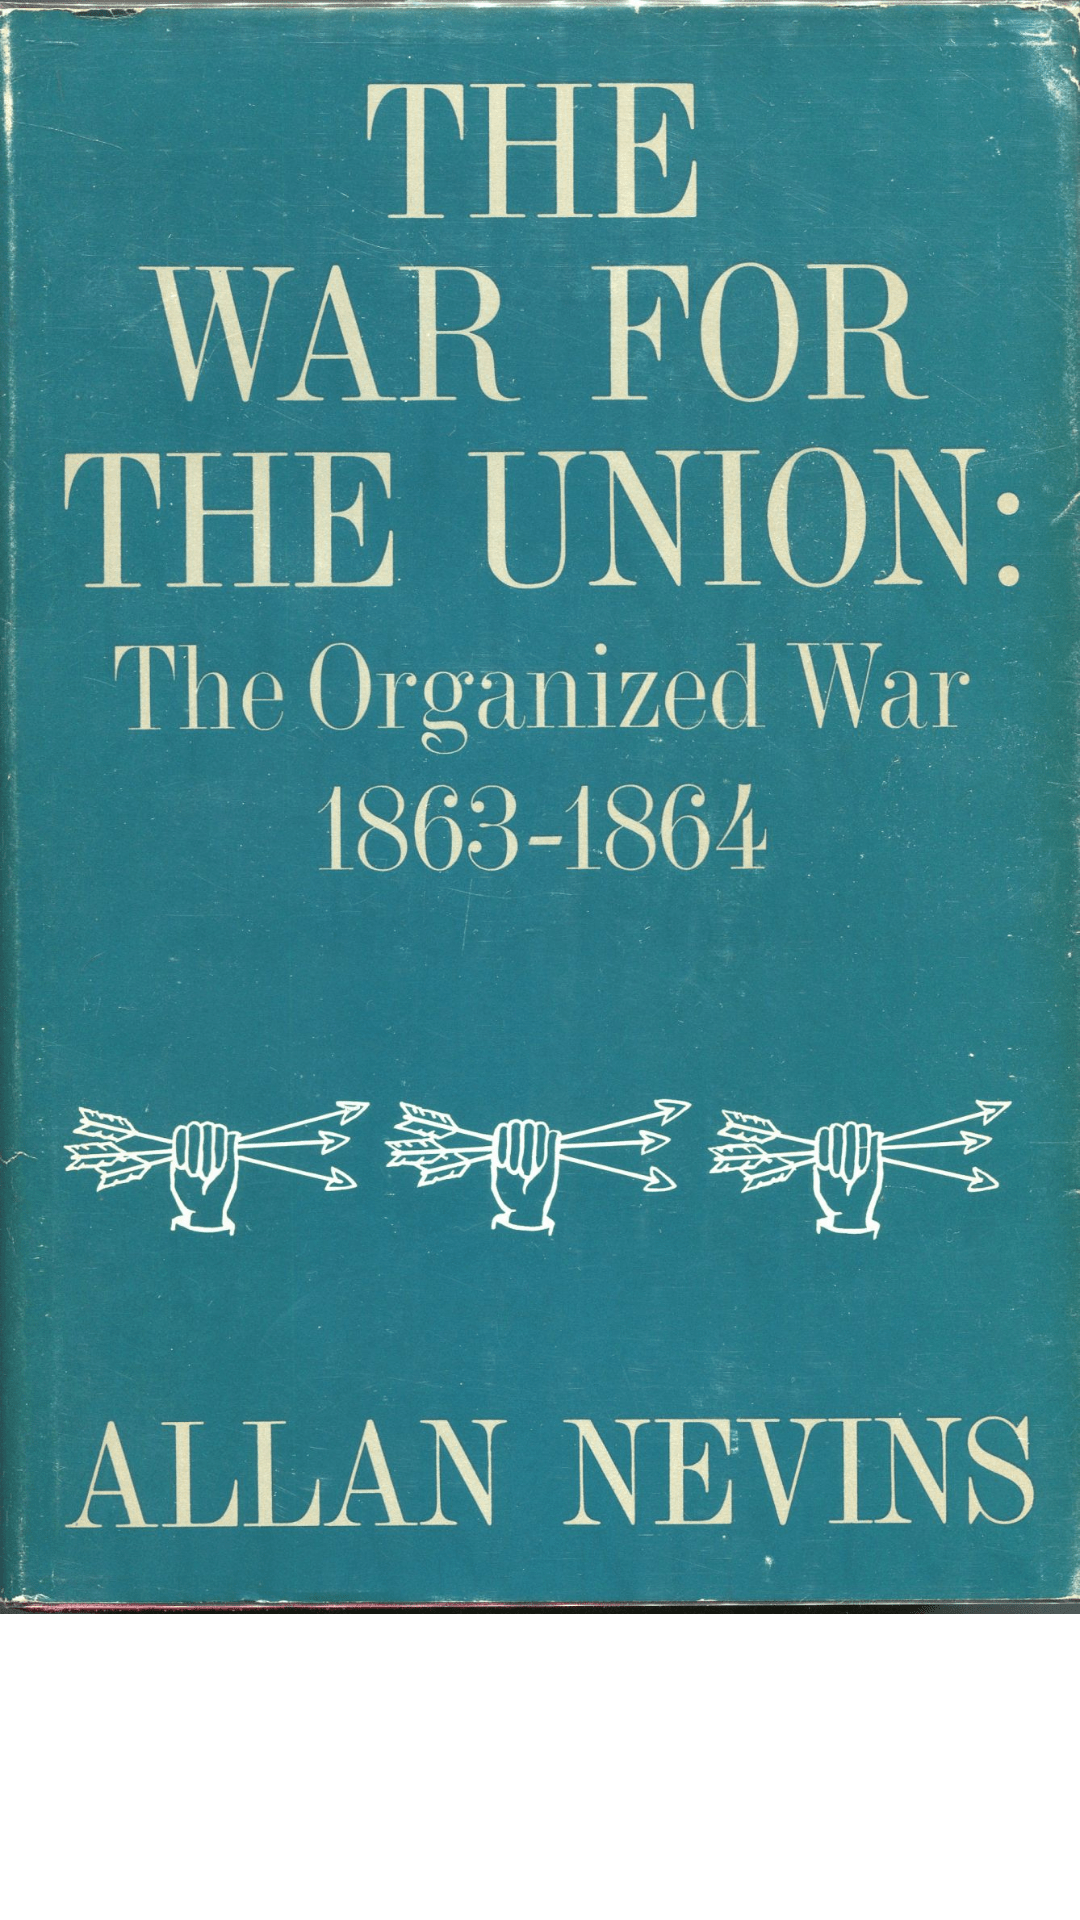 The War for the Union : The Organized War, 1863-1864